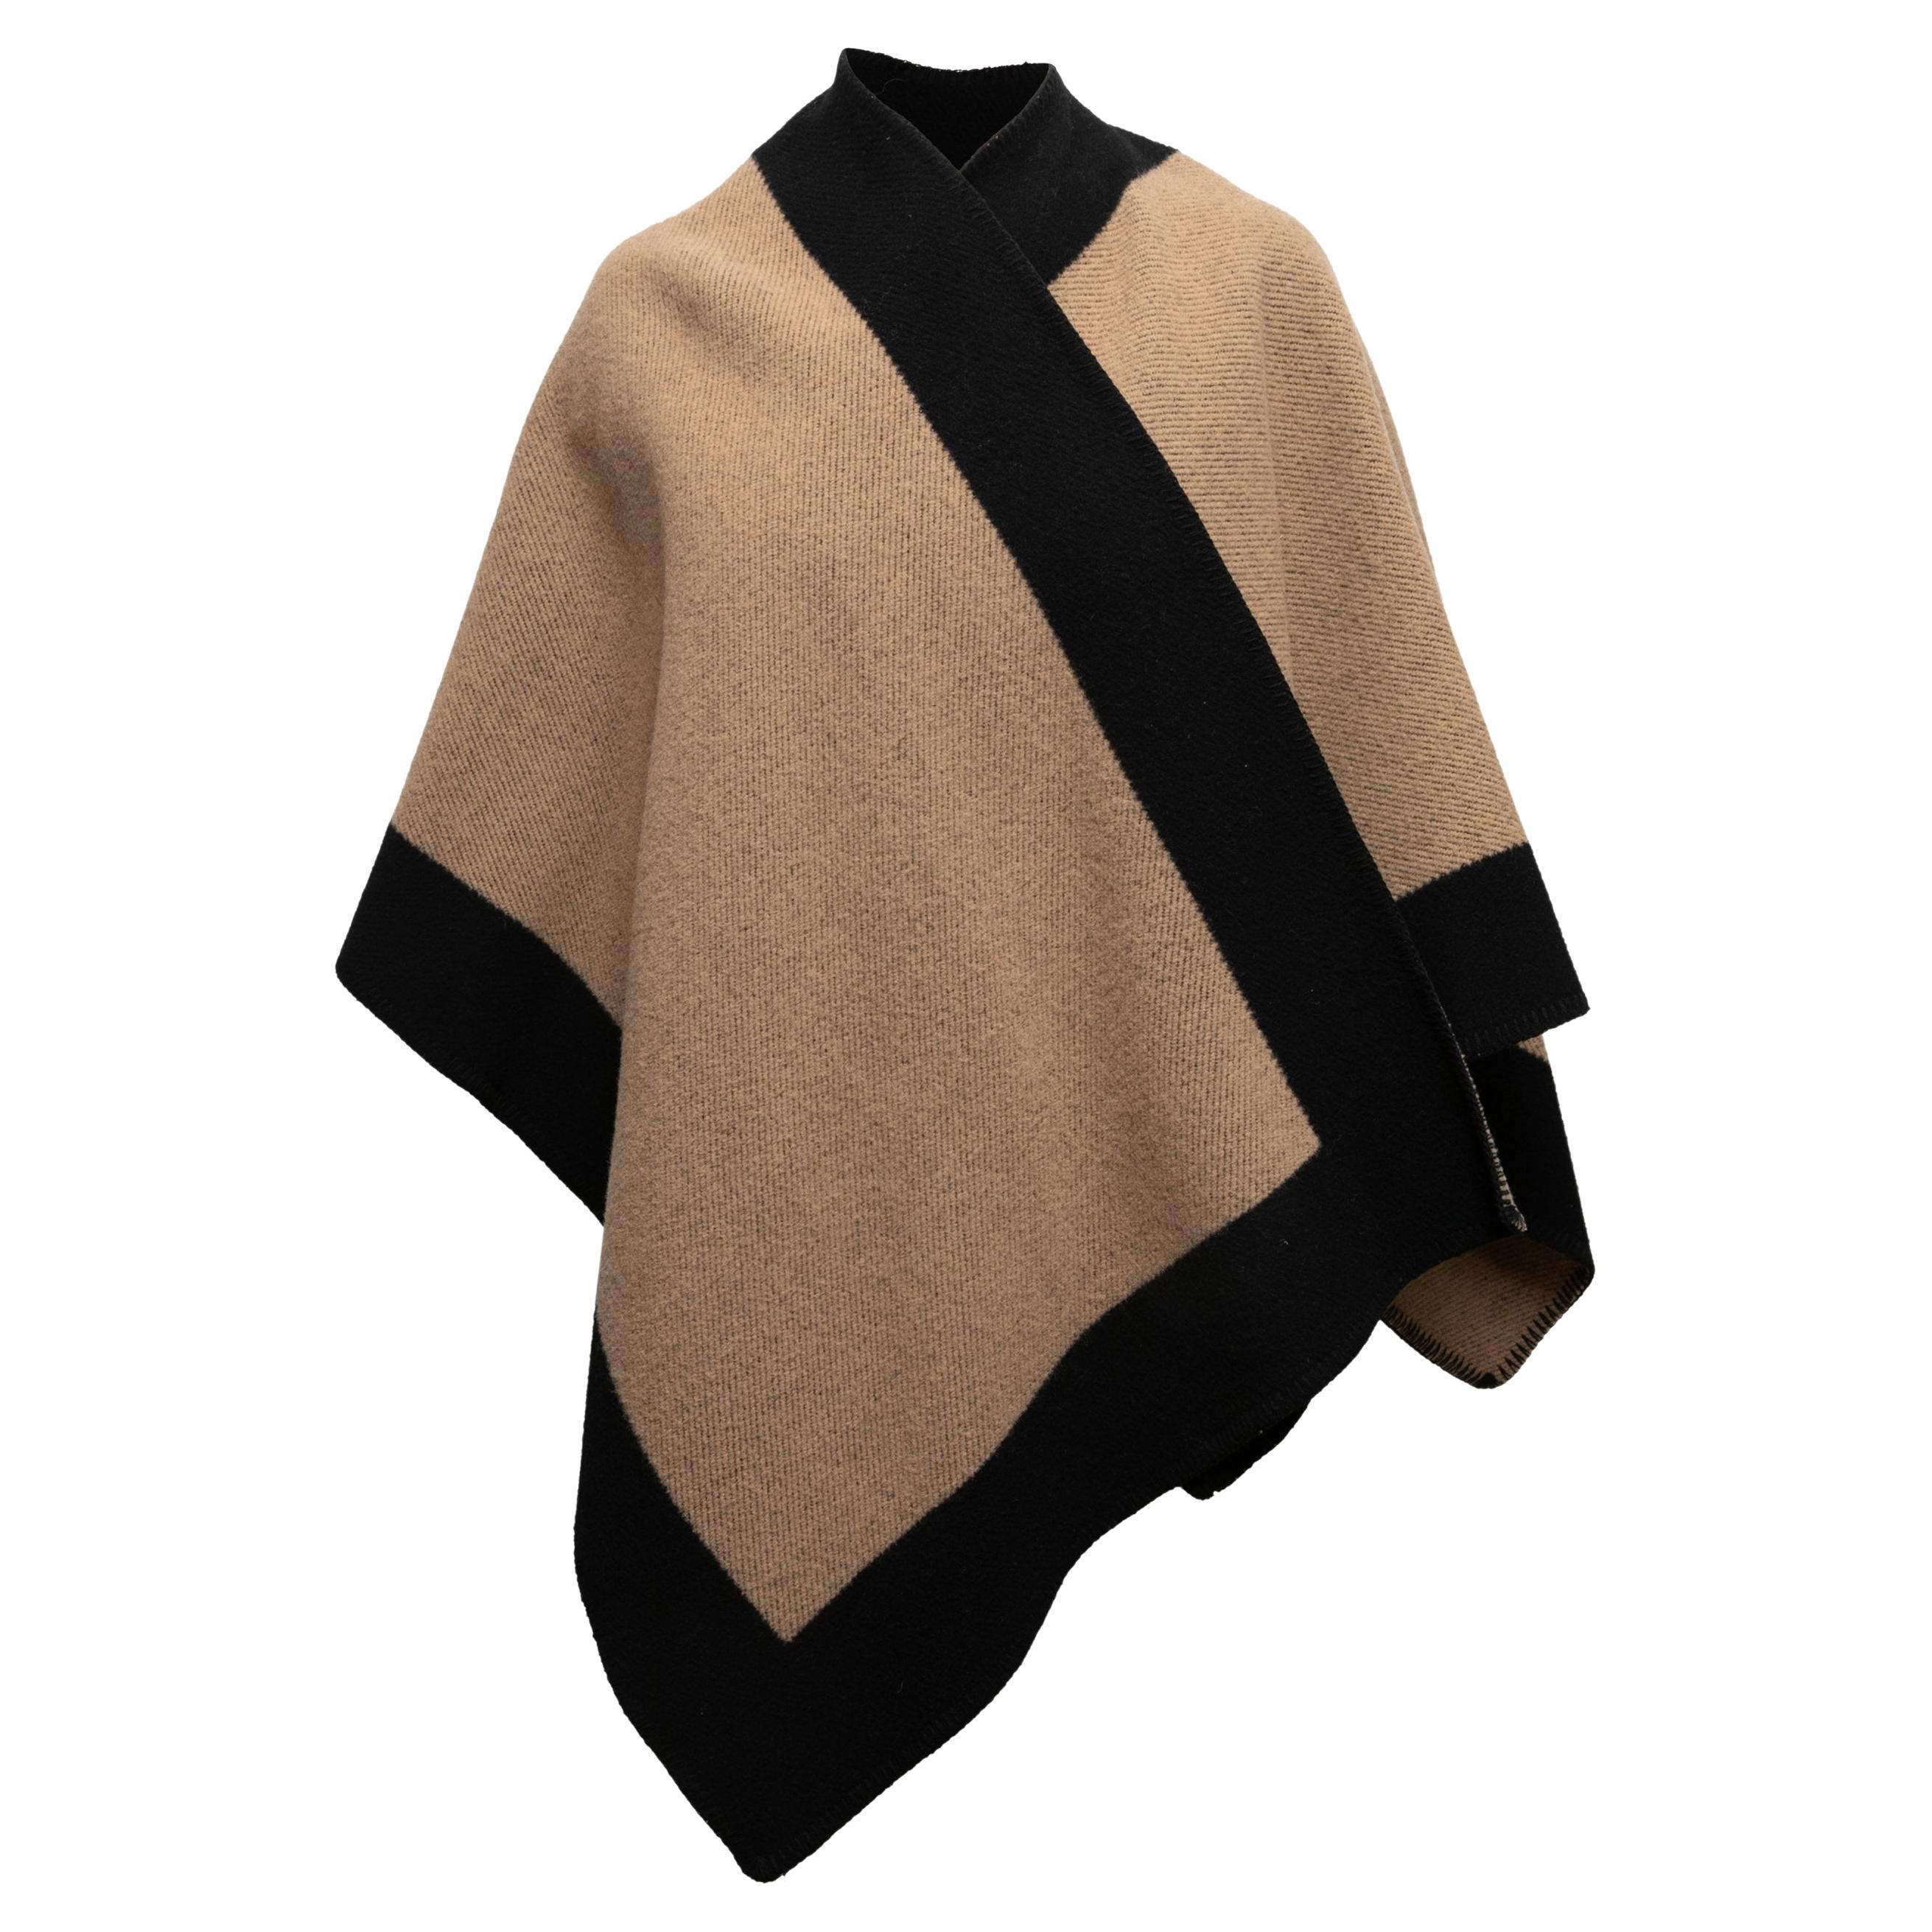 Brown & Black Burberry Knit Cape Size O/S